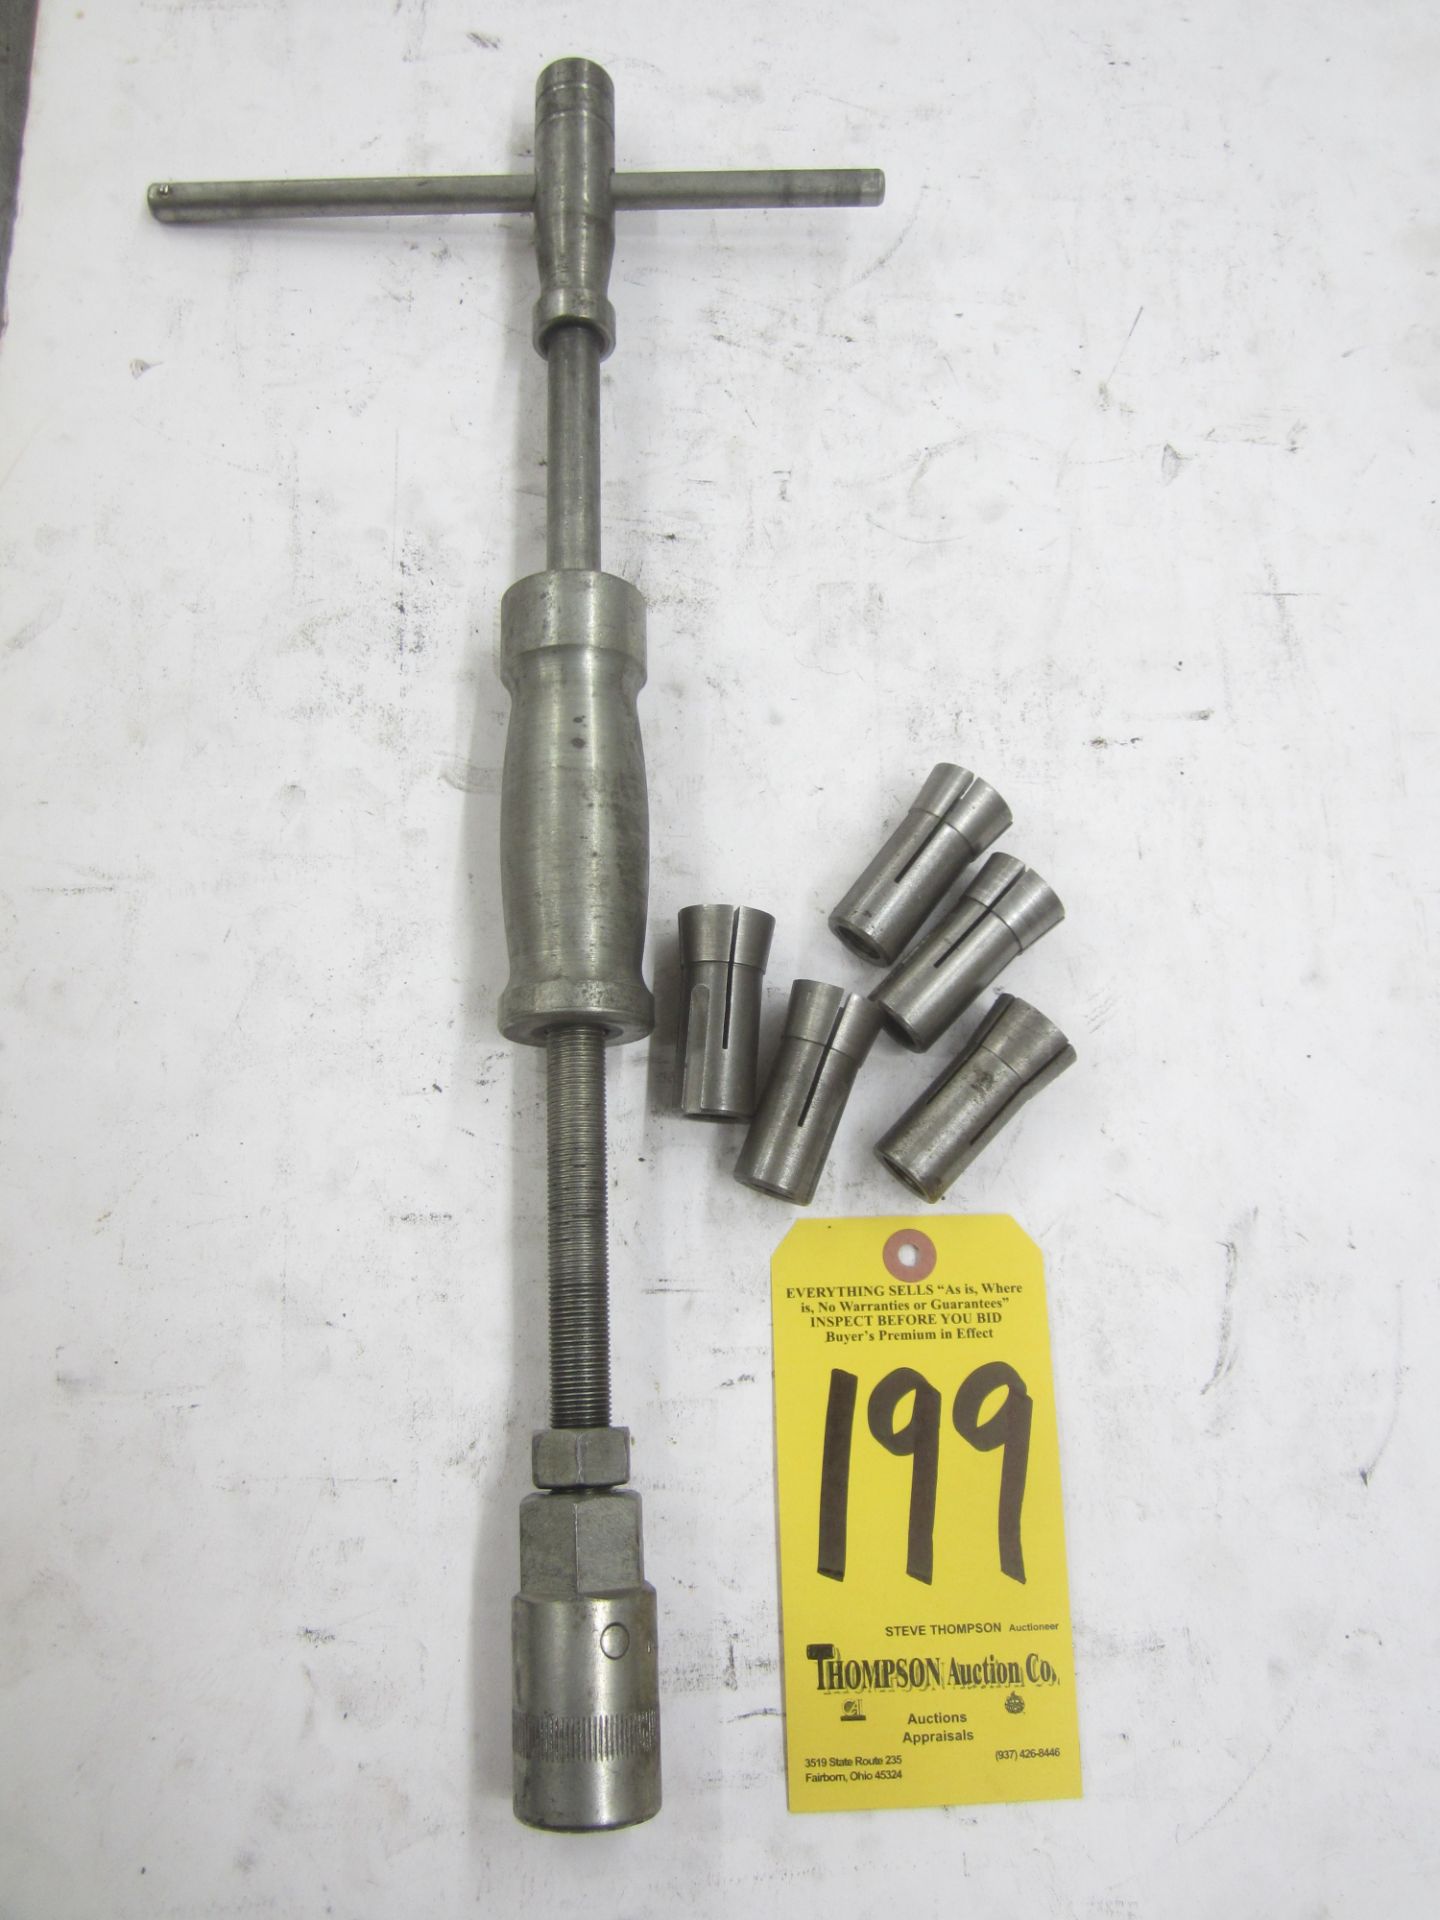 Snap-On Dowel Pin Puller with Collets